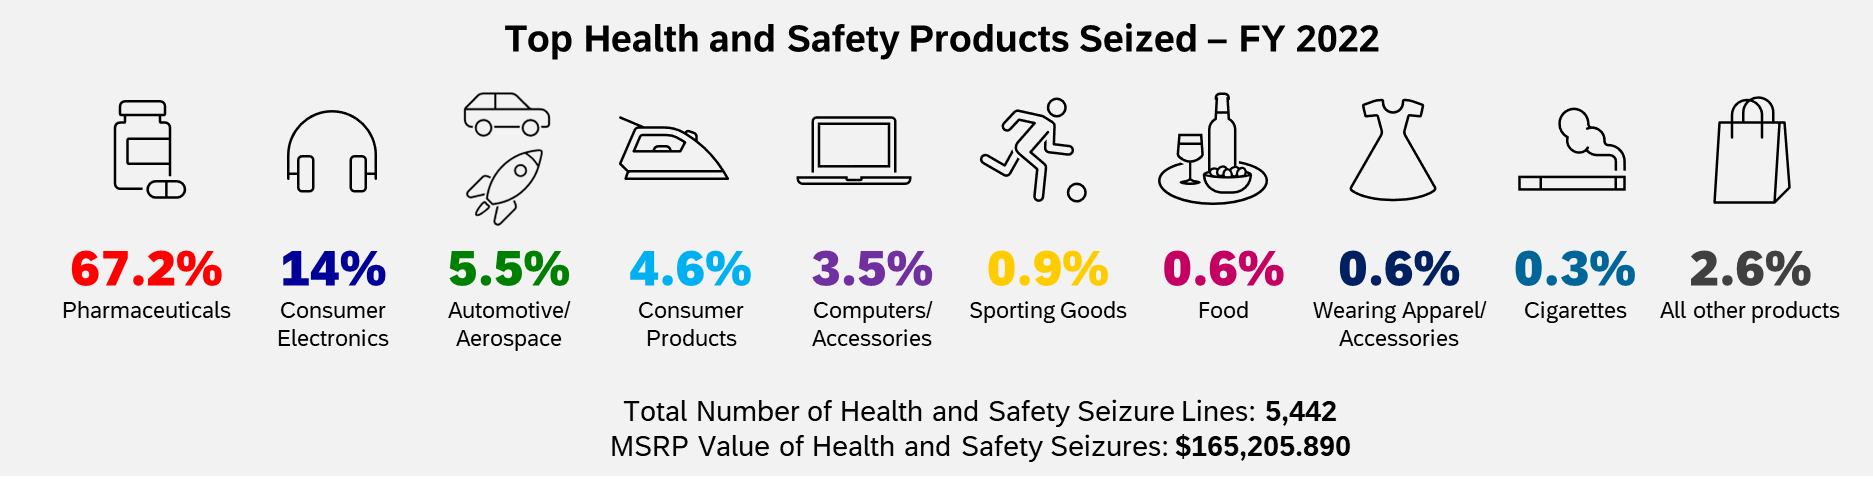 Top Health & Safety Products Seized in FY2022. 67.2% Pharmaceuticals; 14% Consumer Electronics; 5.5% Automotive/Aerospace; 3.5% Computers/Accessories; .9% Sporting Goods; .6% Food; .6% Wearing Apparel/Accessories; .3% Cigarettes; 2.6% All Other Products. Total Number of Health/Safety Seizure Lines: 5,422. MSRP Value of Health/Safety Seizures: $165,205,890 